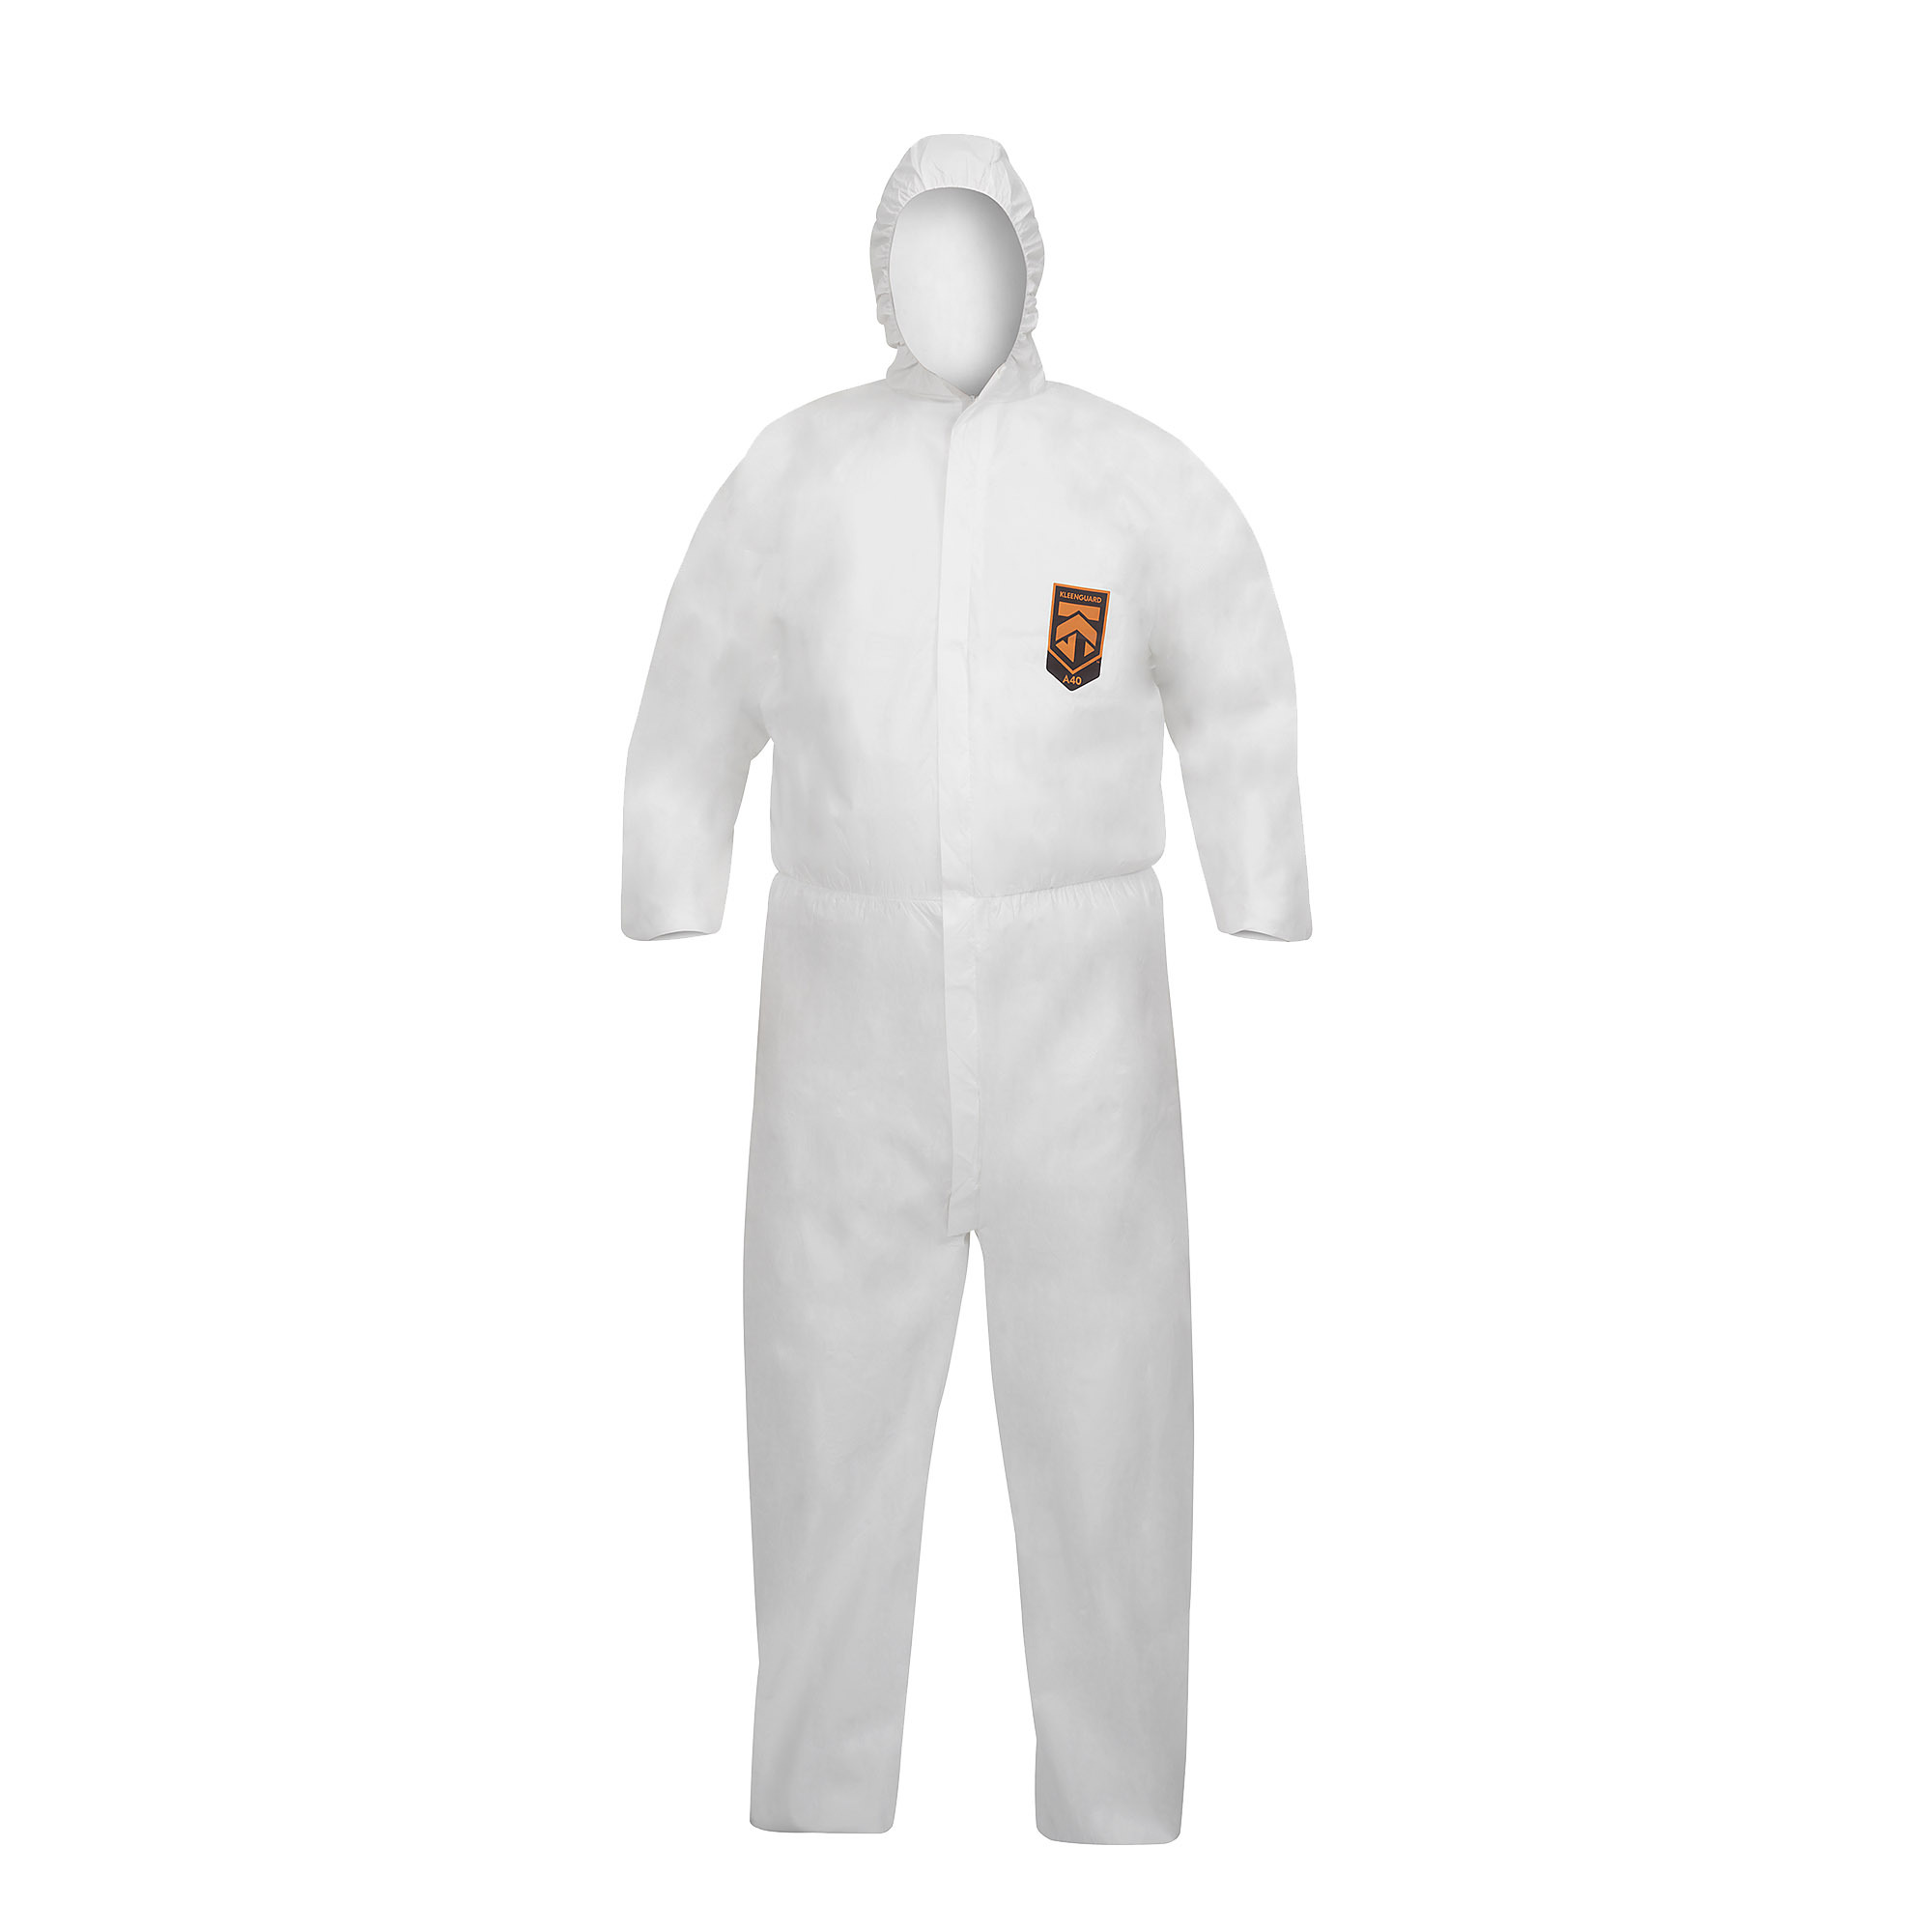 KleenGuard® A40 Liquid & Particle Protection Hooded Coveralls (97920), Large White Coveralls, 25 Coveralls/Case, 1 Coverall / Pack (25 coveralls) - 97920